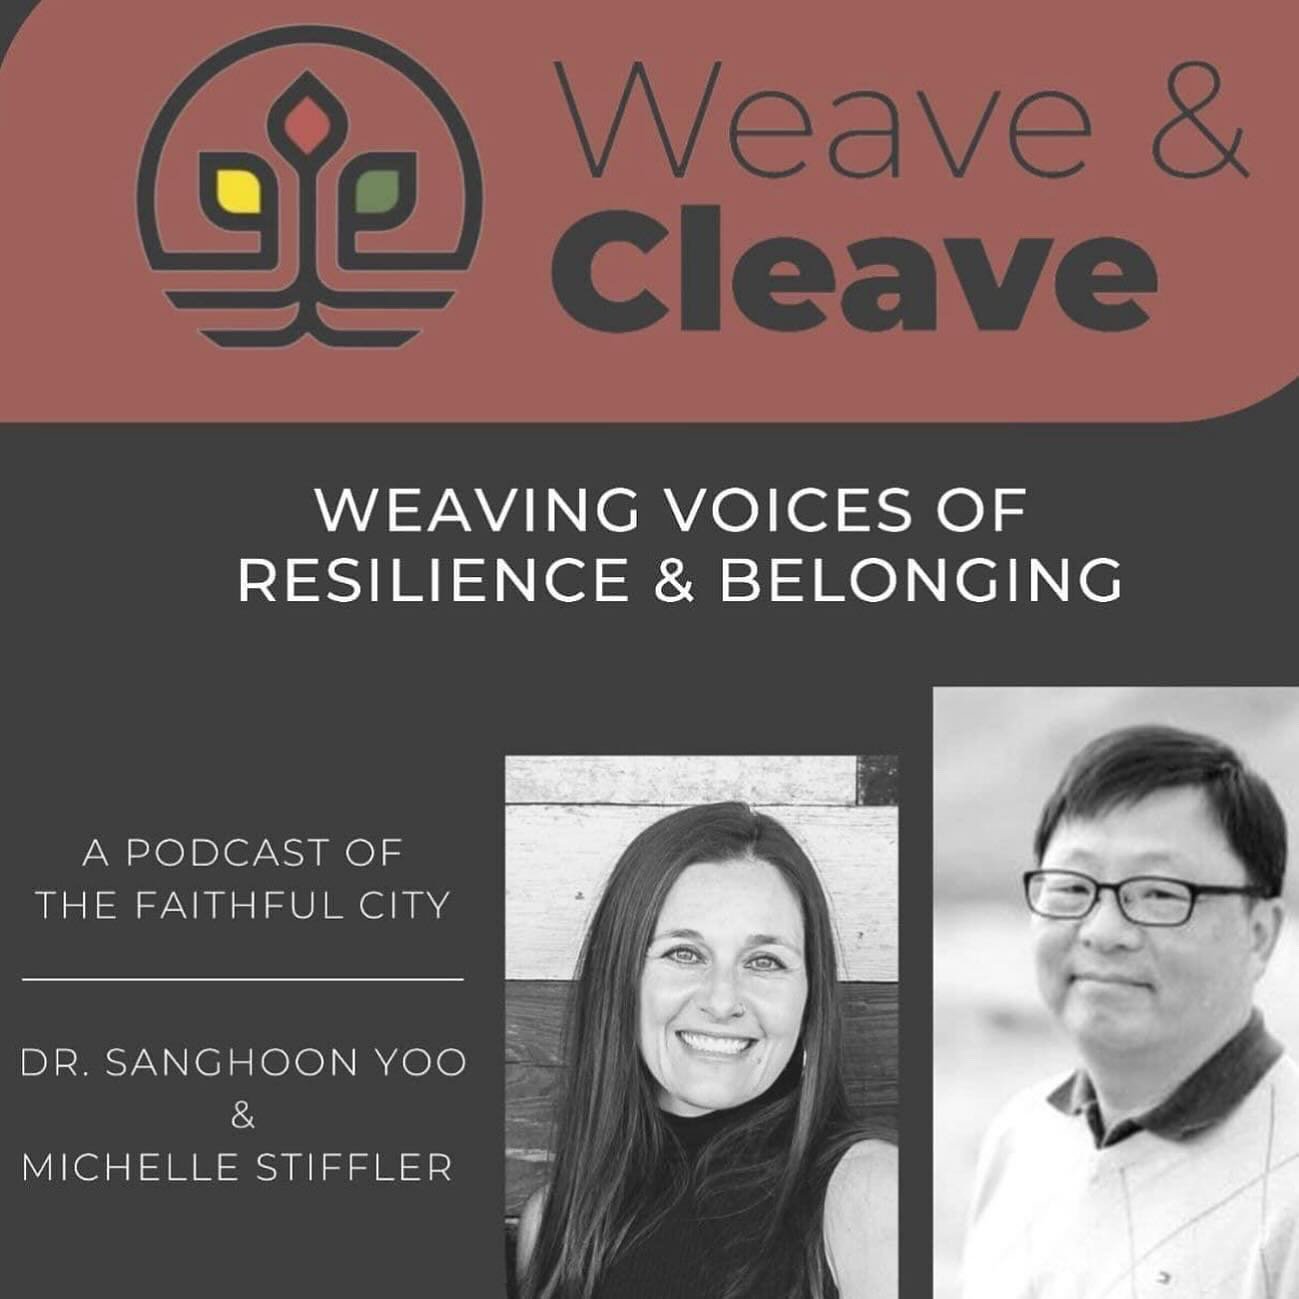 Weave &amp; Cleave Podcast (The Faithful City)
Weaving Voices of Resilience and Belonging
Michelle Stiffler and Sanghoon Yoo

Season 3 Episode 8

&ldquo;Preparing for the 2nd Annual Conference...and announcing Affinity Groups!

Spreaker
https://www.s